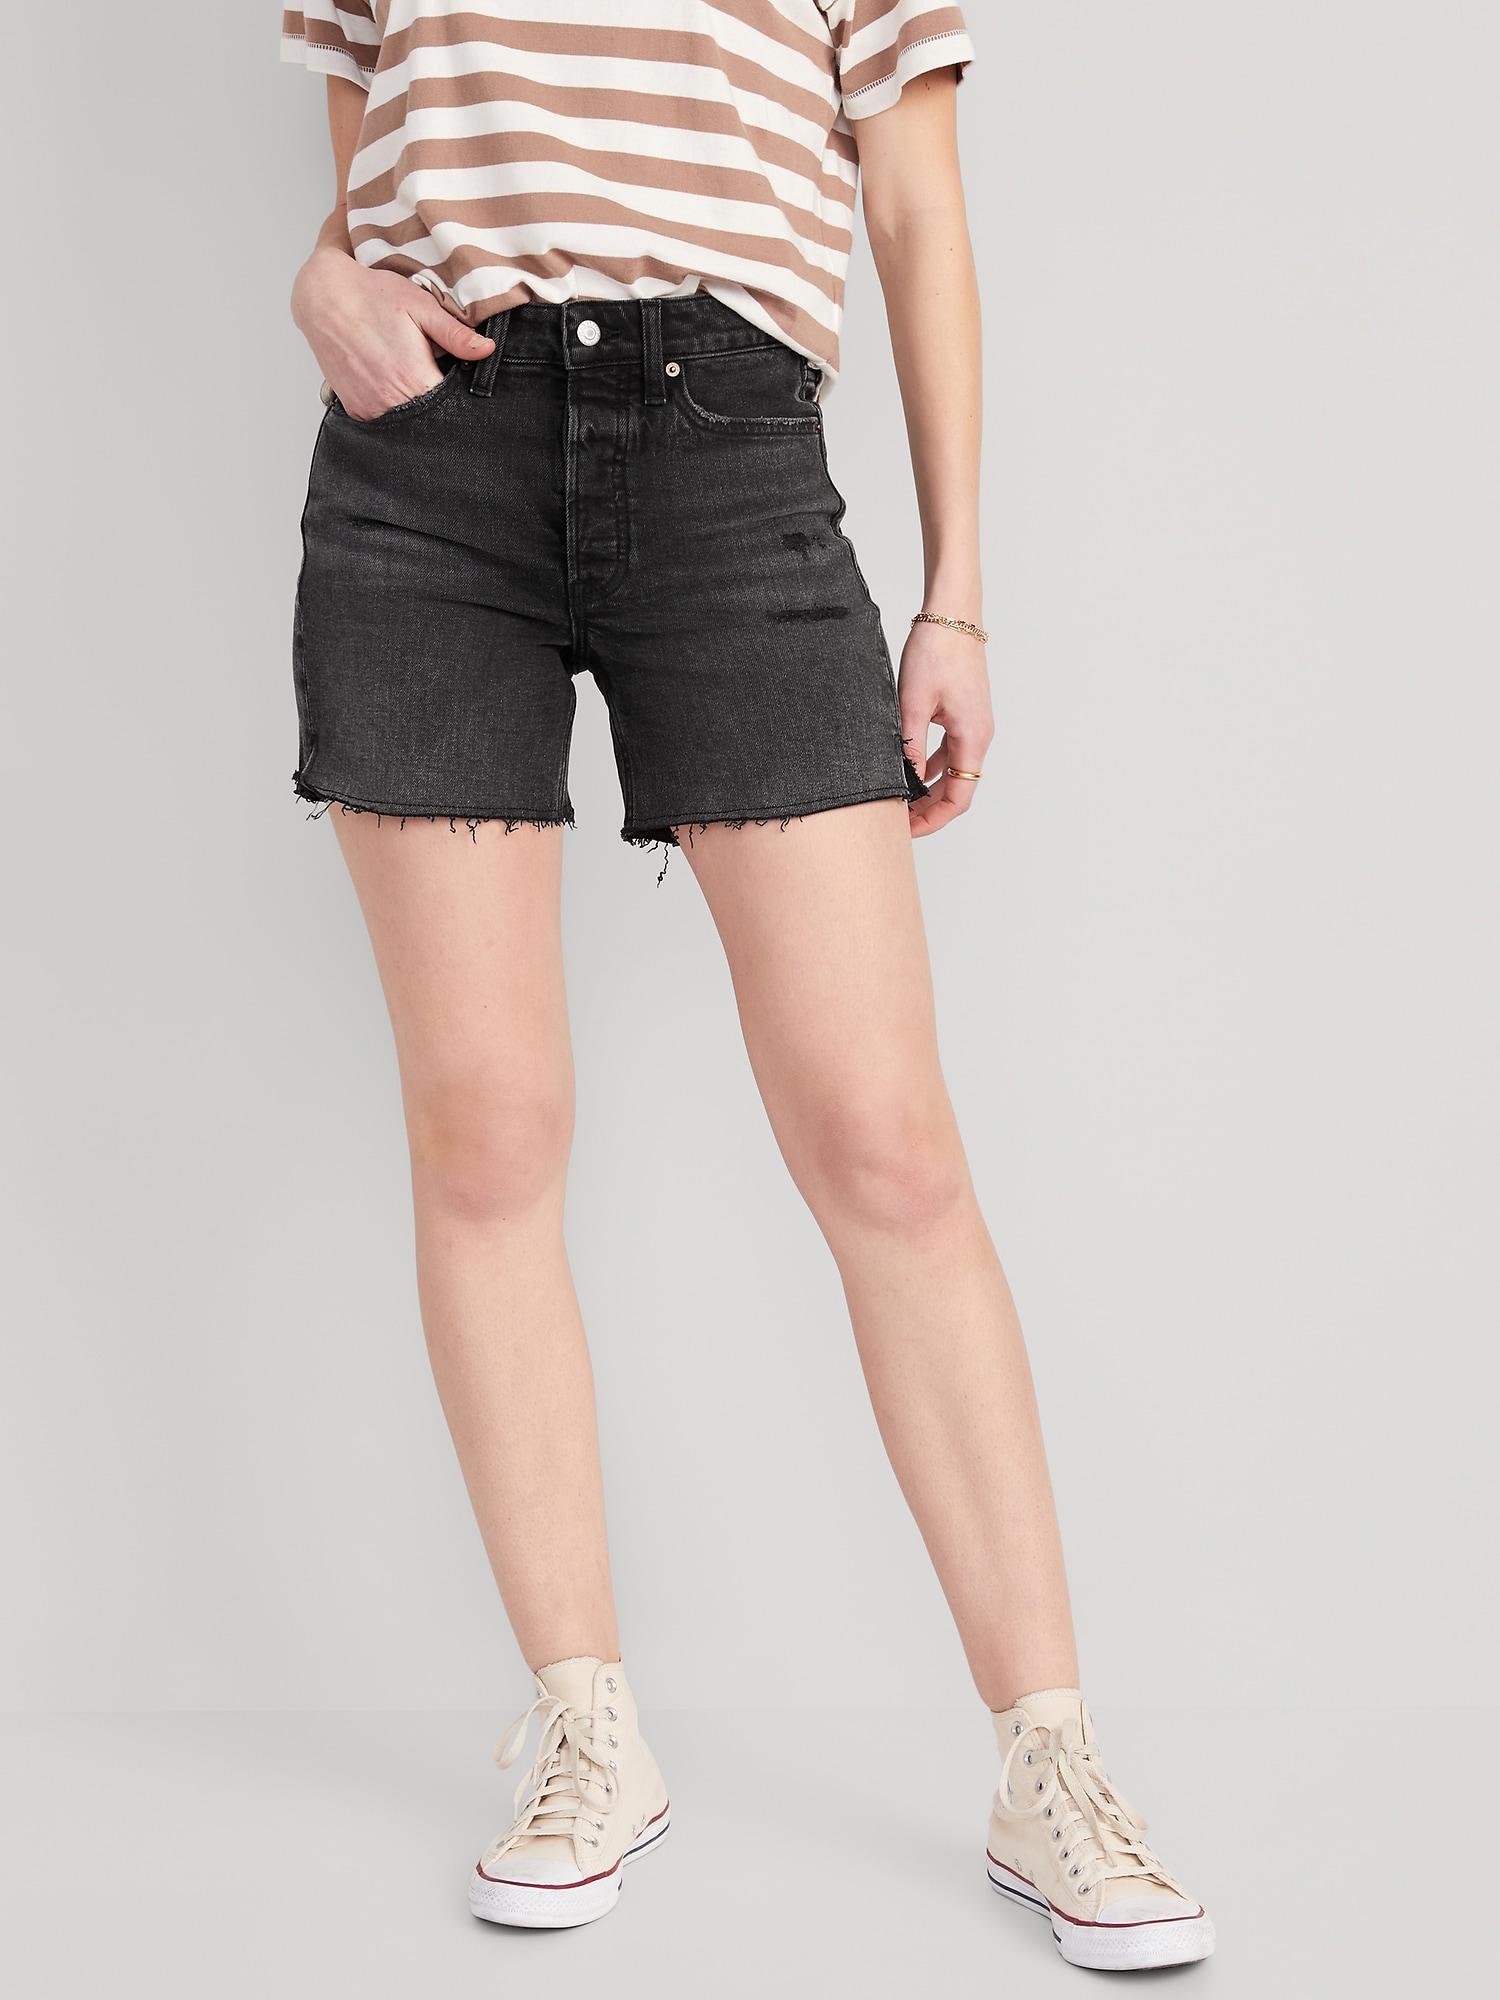 Old Navy High-Waisted Button-Fly O.G. Straight Ripped Side-Slit Jean Shorts for Women -- 5-inch inseam black. 1